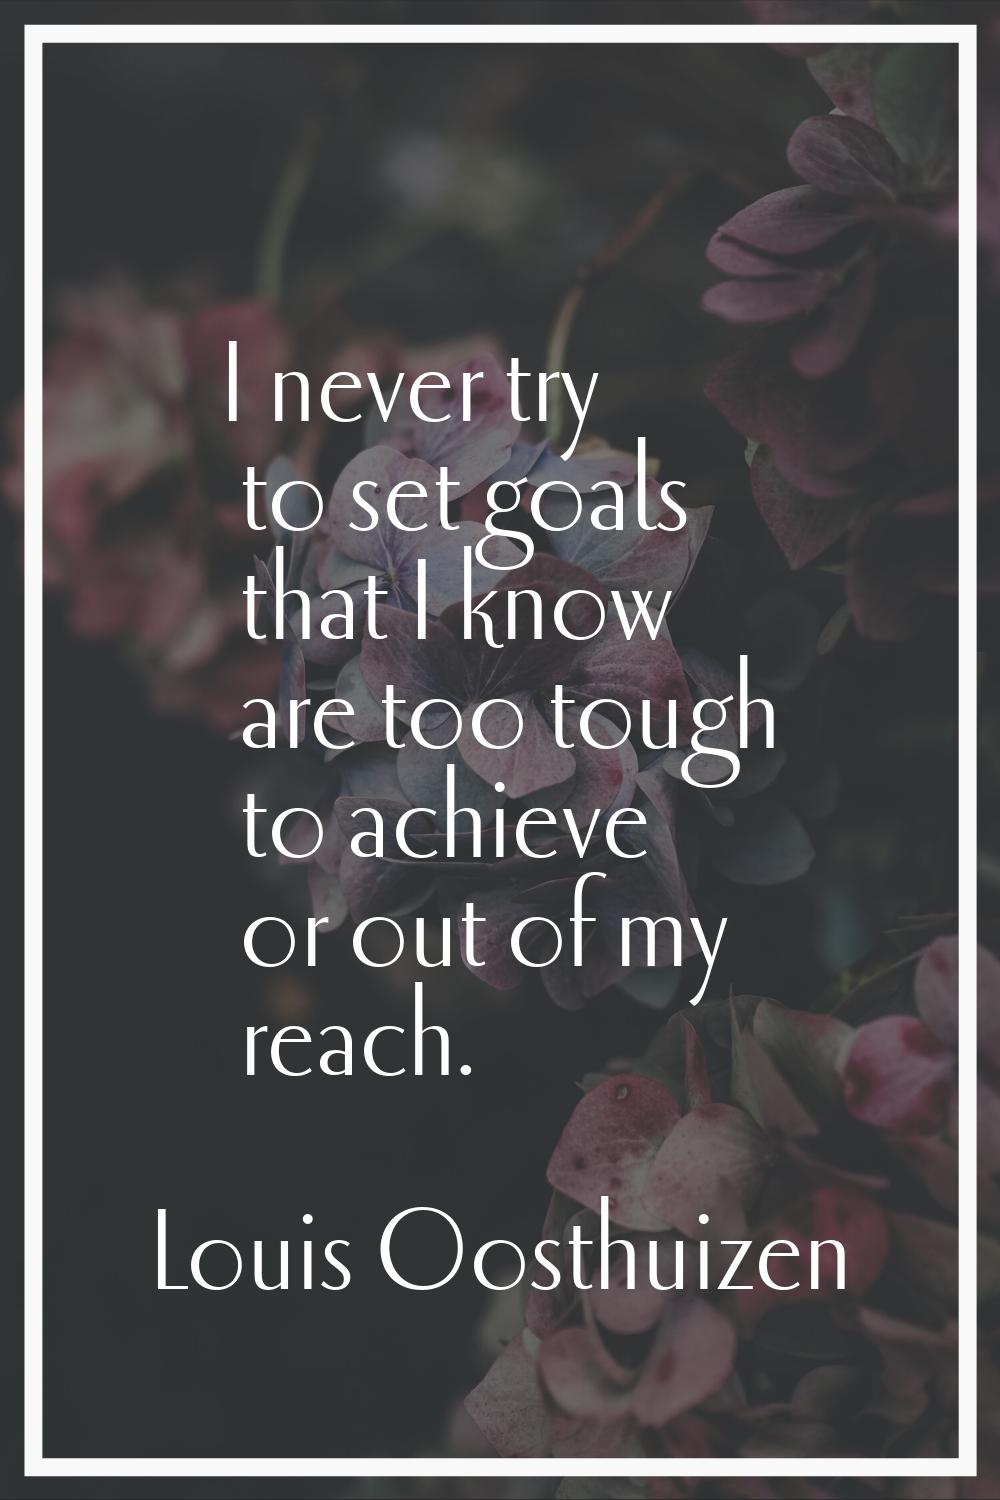 I never try to set goals that I know are too tough to achieve or out of my reach.